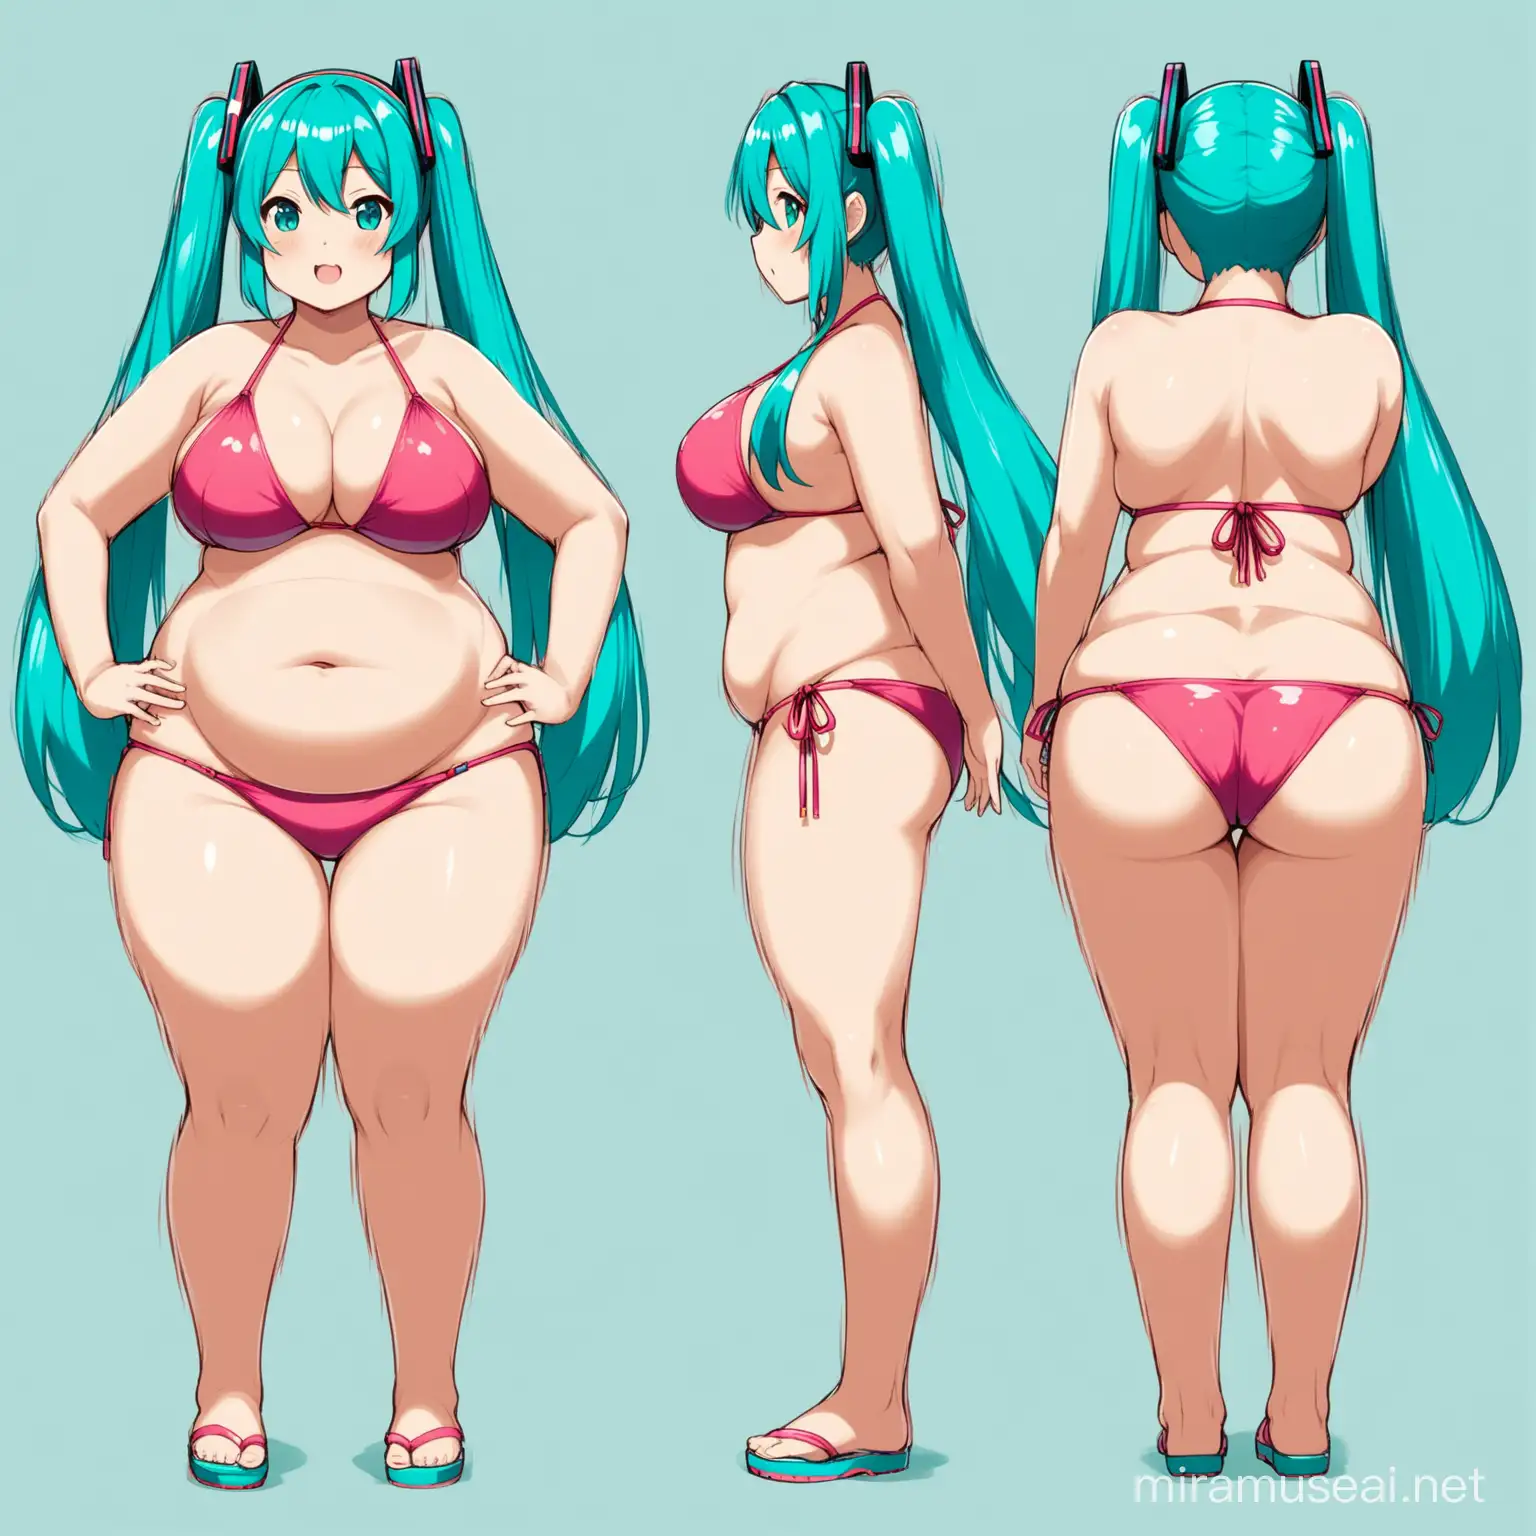 Fat and chubby Hatsune miku in bikinis (front, side, and back view) (100 steps)